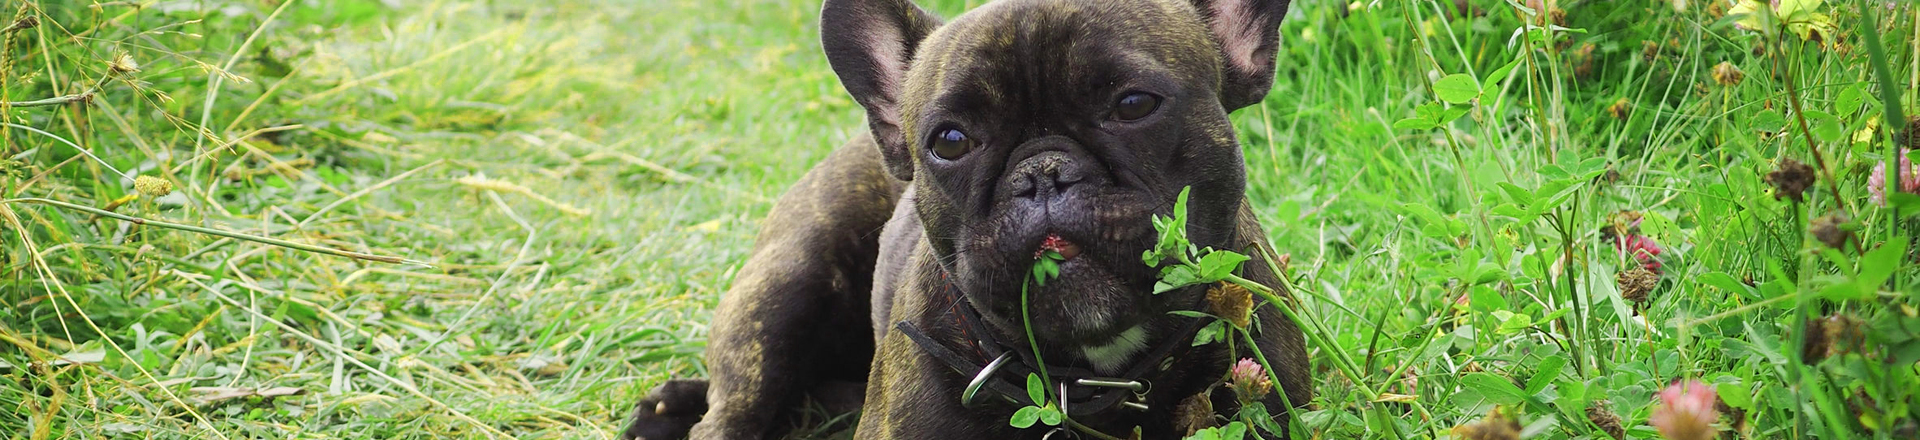 dog eating a plant that could be toxic